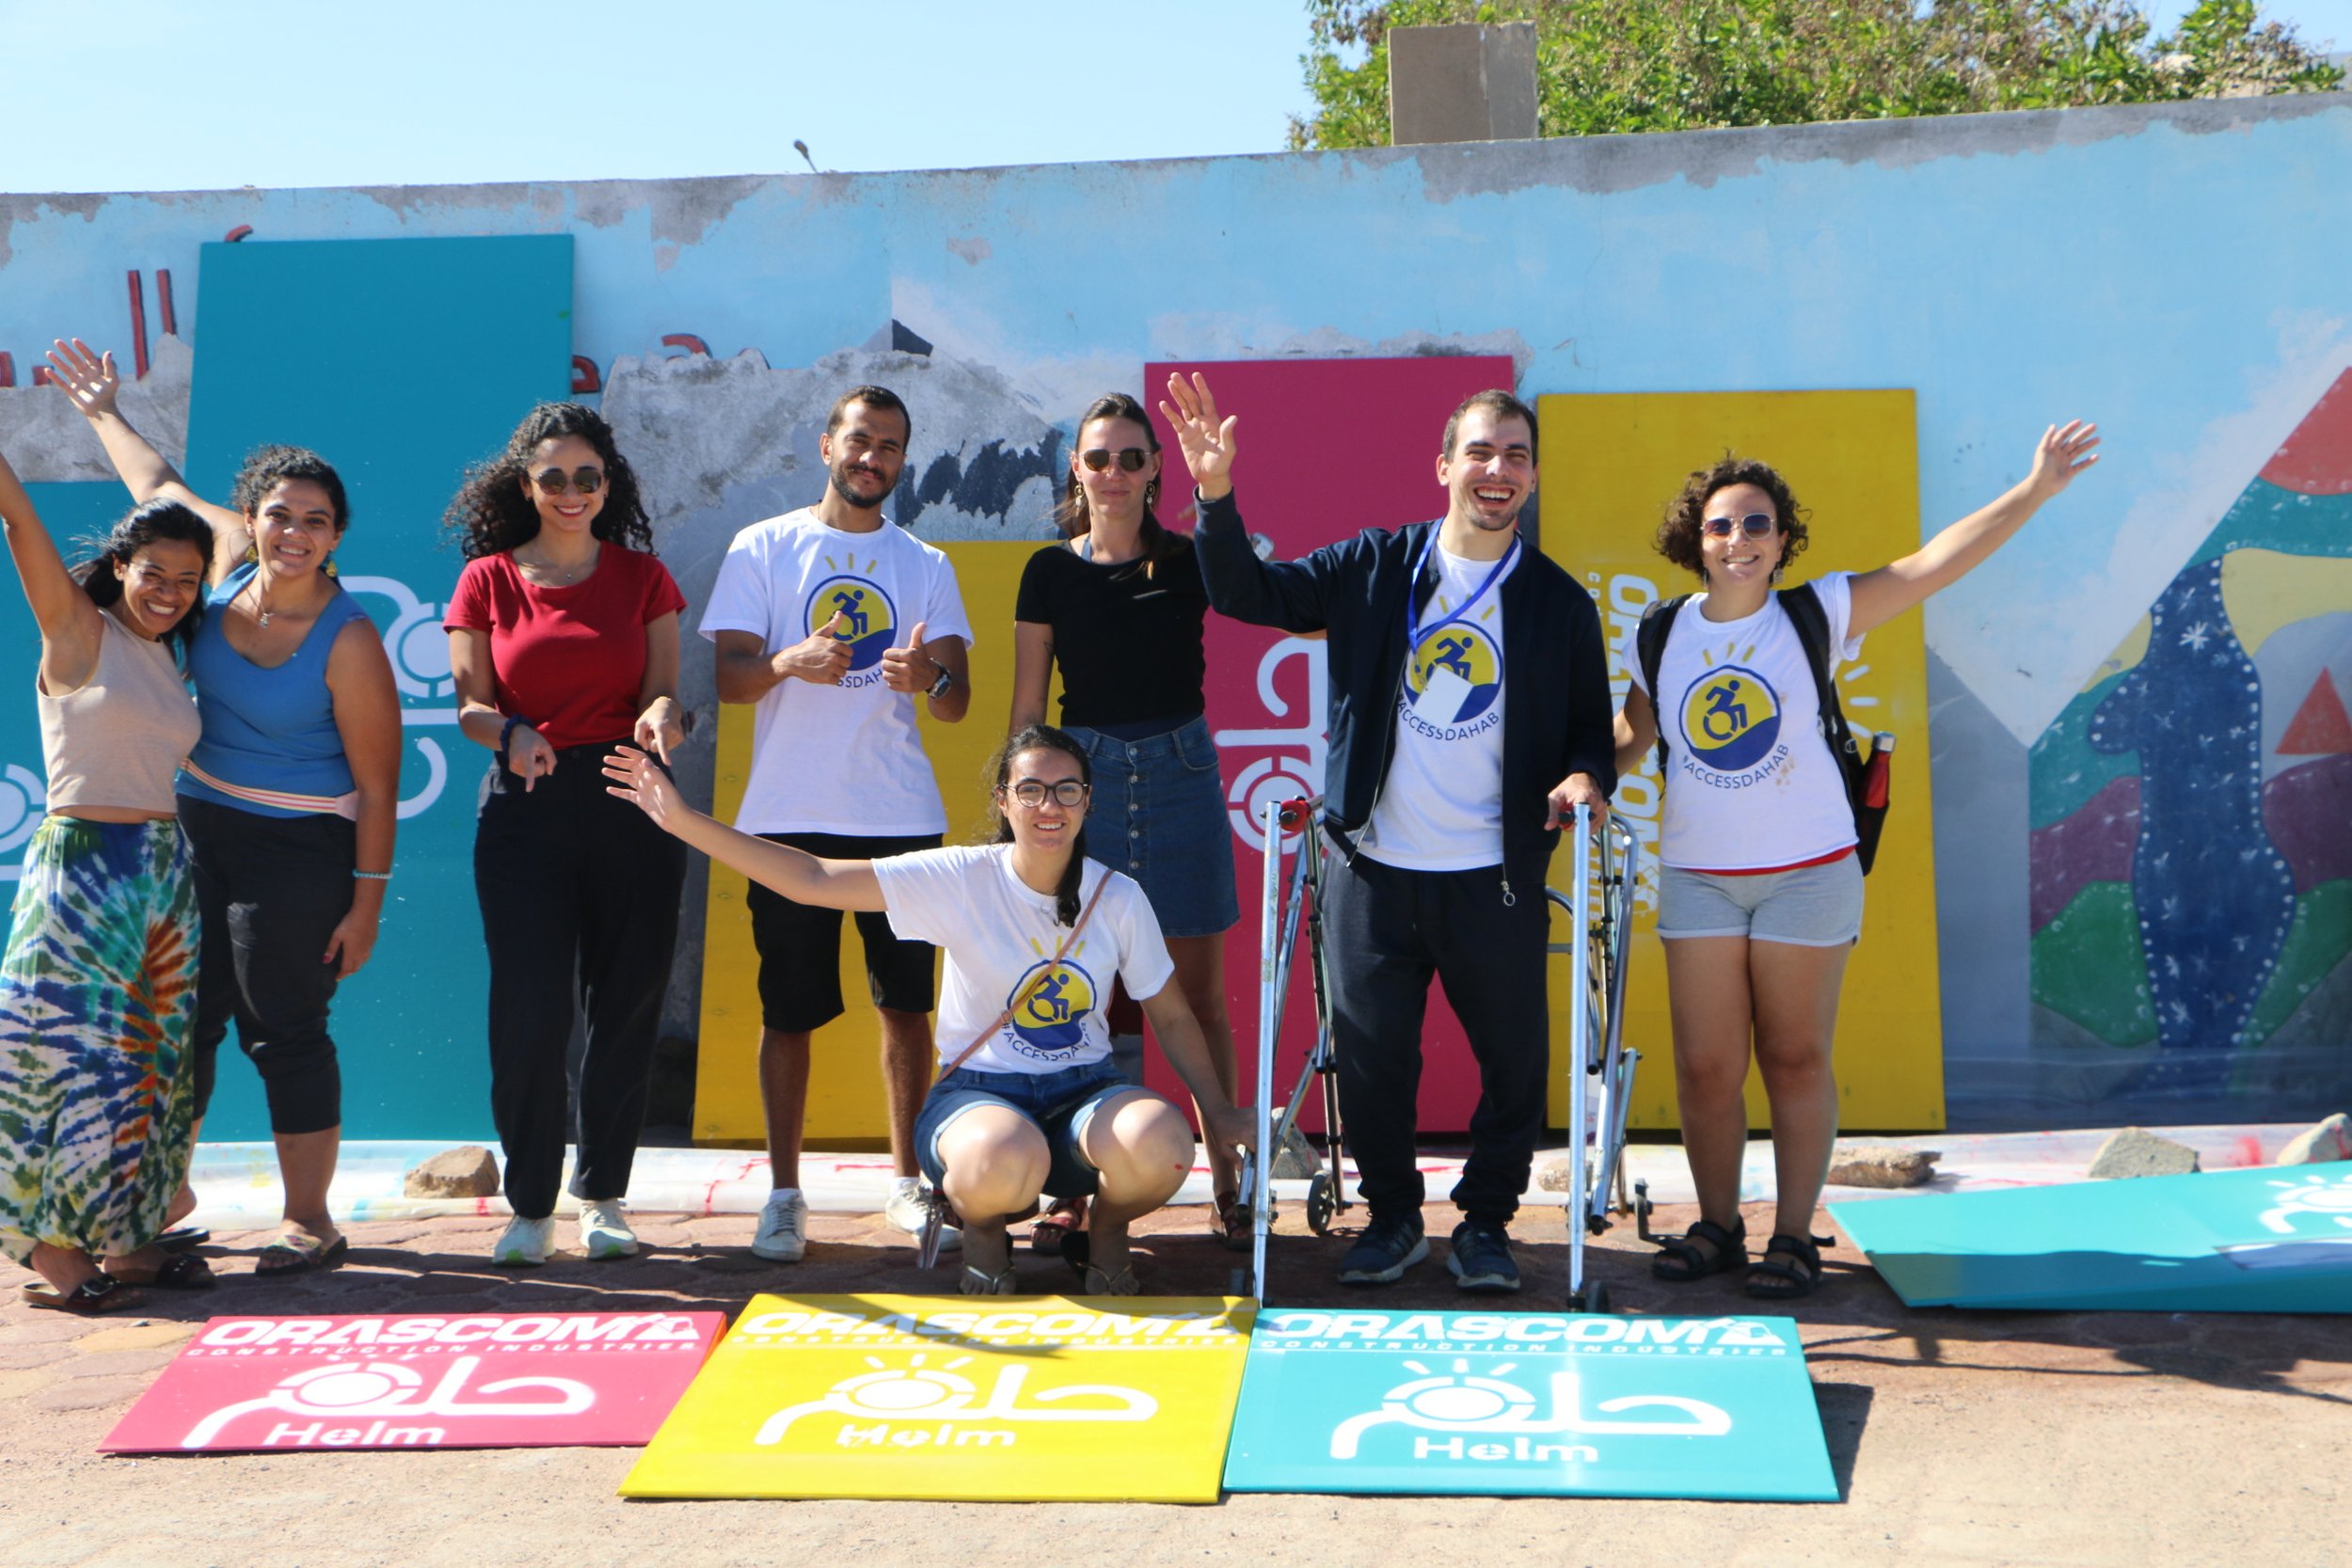 Access Dahab event - Helm team with volunteers and ambassador coloring ramps.JPG